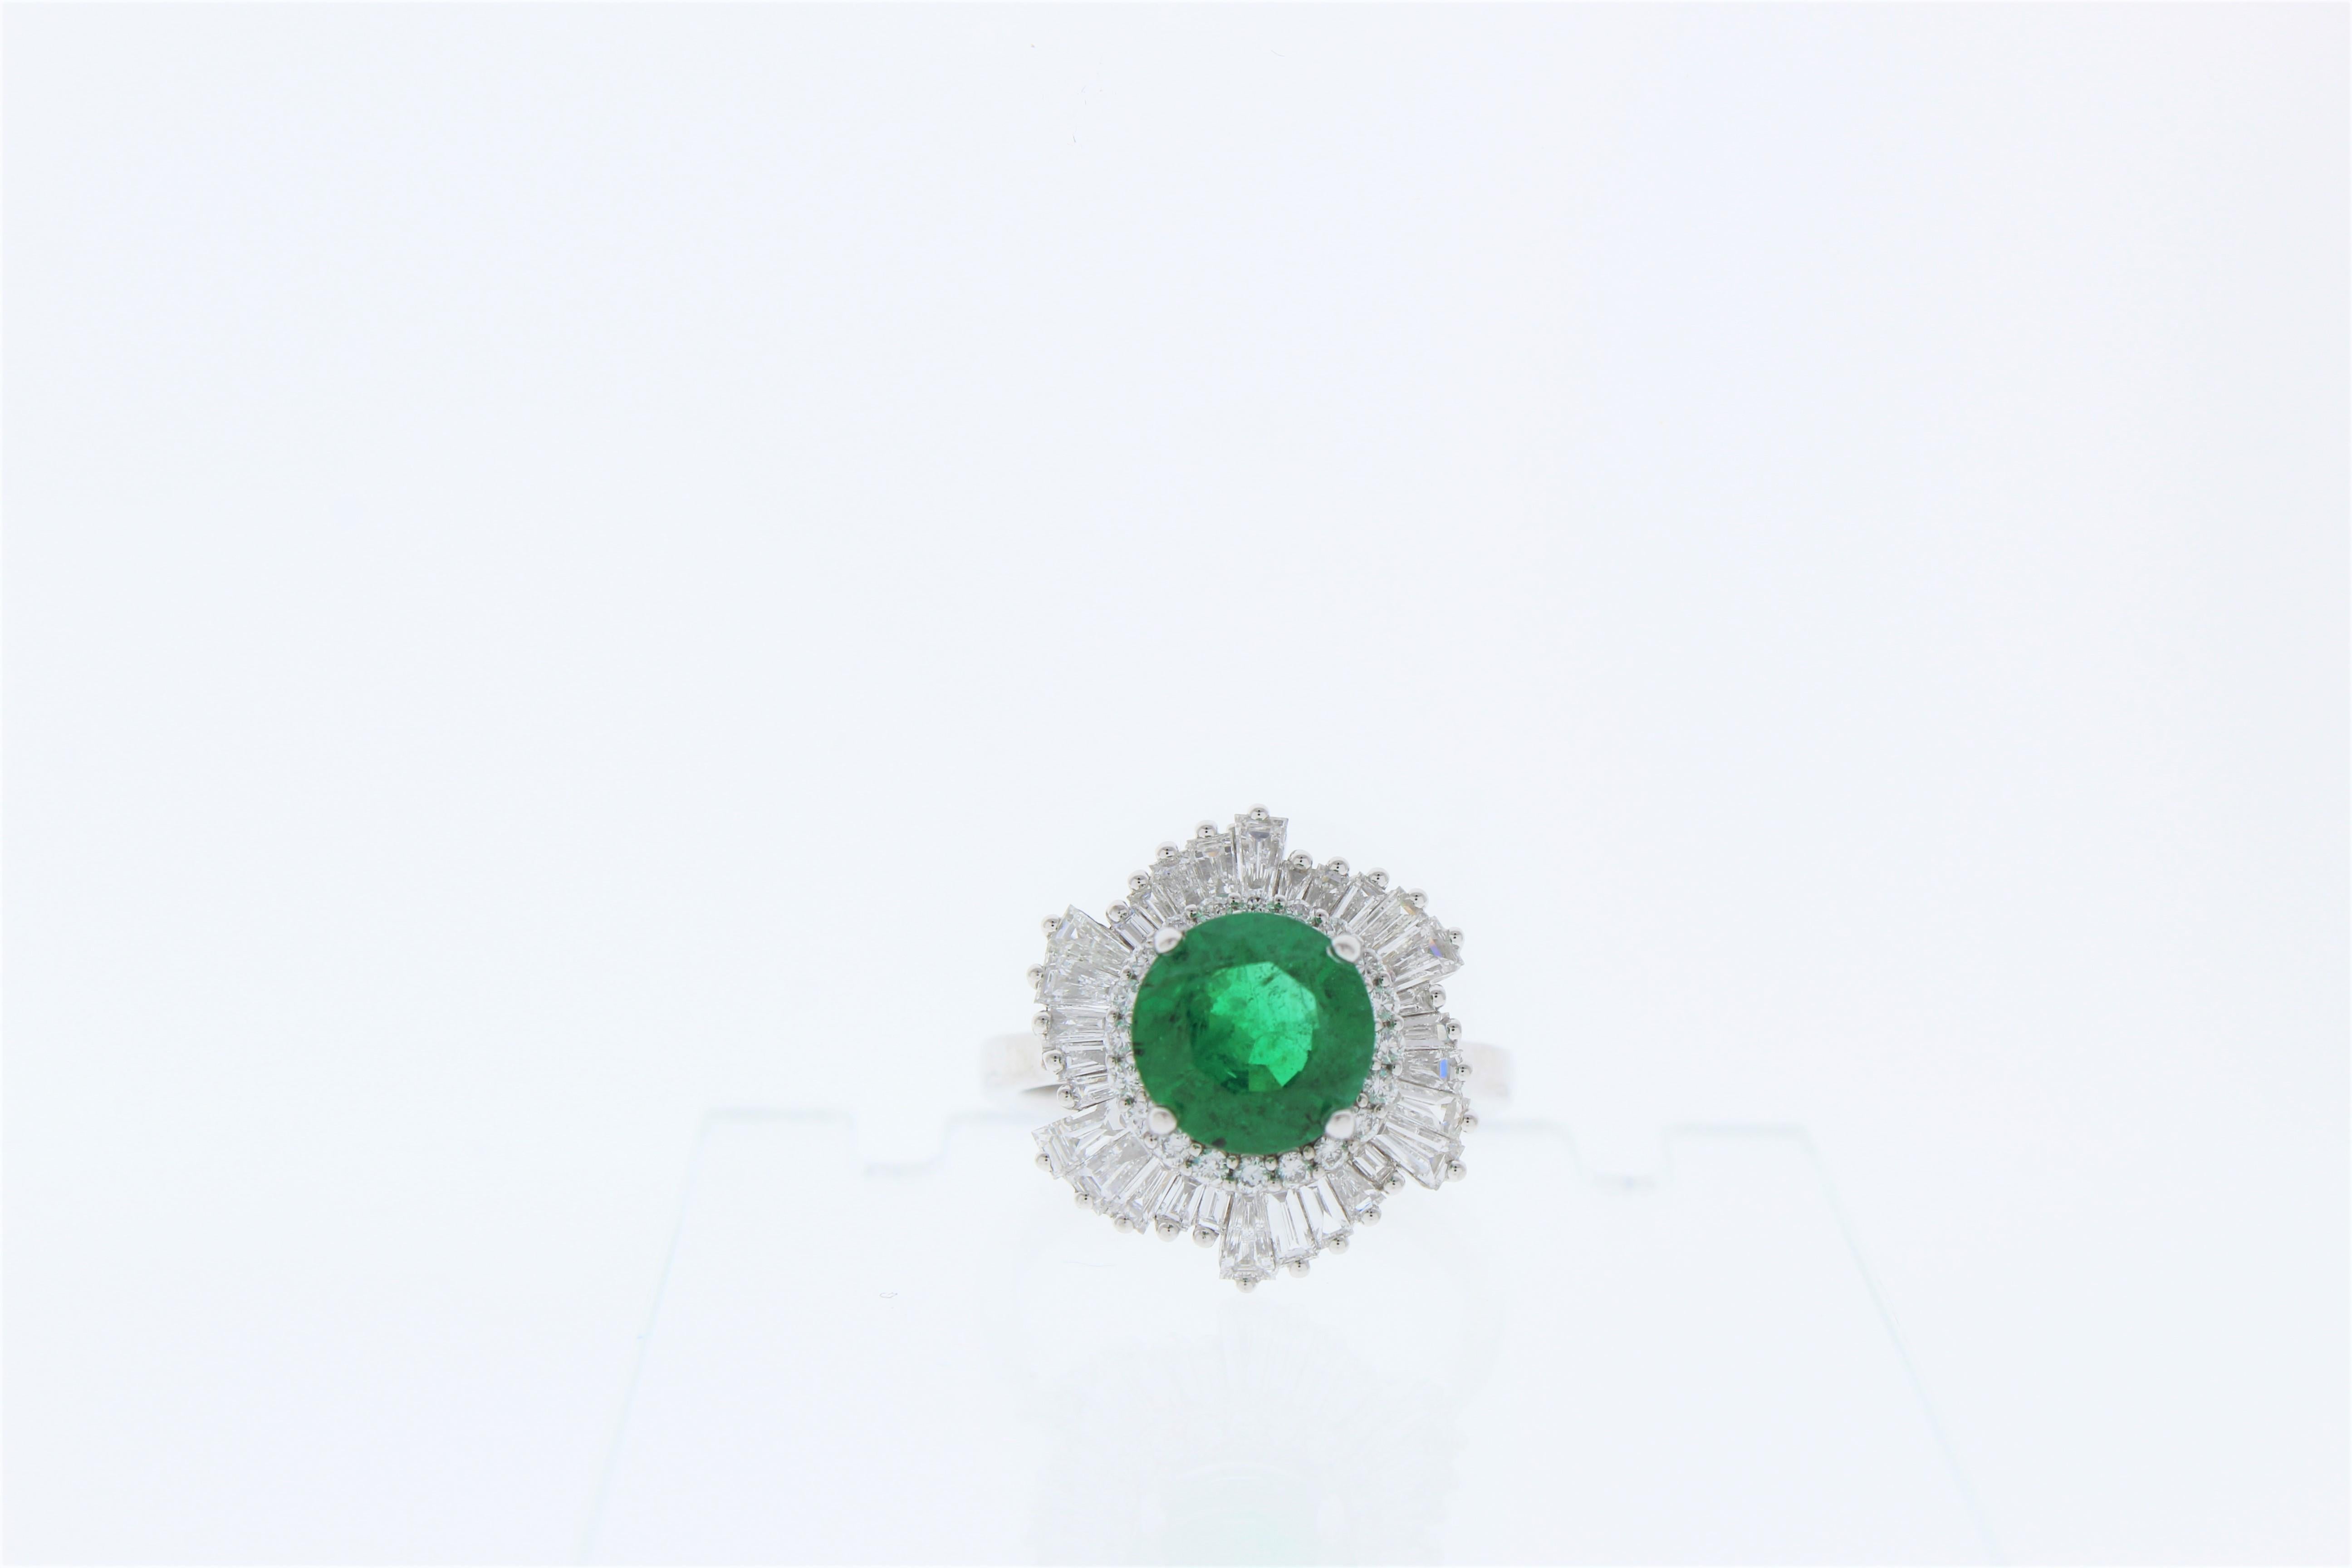 Would you look at this beauty! Simple in design, but there is nothing ordinary about the gorgeous color of this breathtaking green emerald and diamond ring. This stunning piece features a round 2.31 carat emerald. The emerald is from Zambia. The